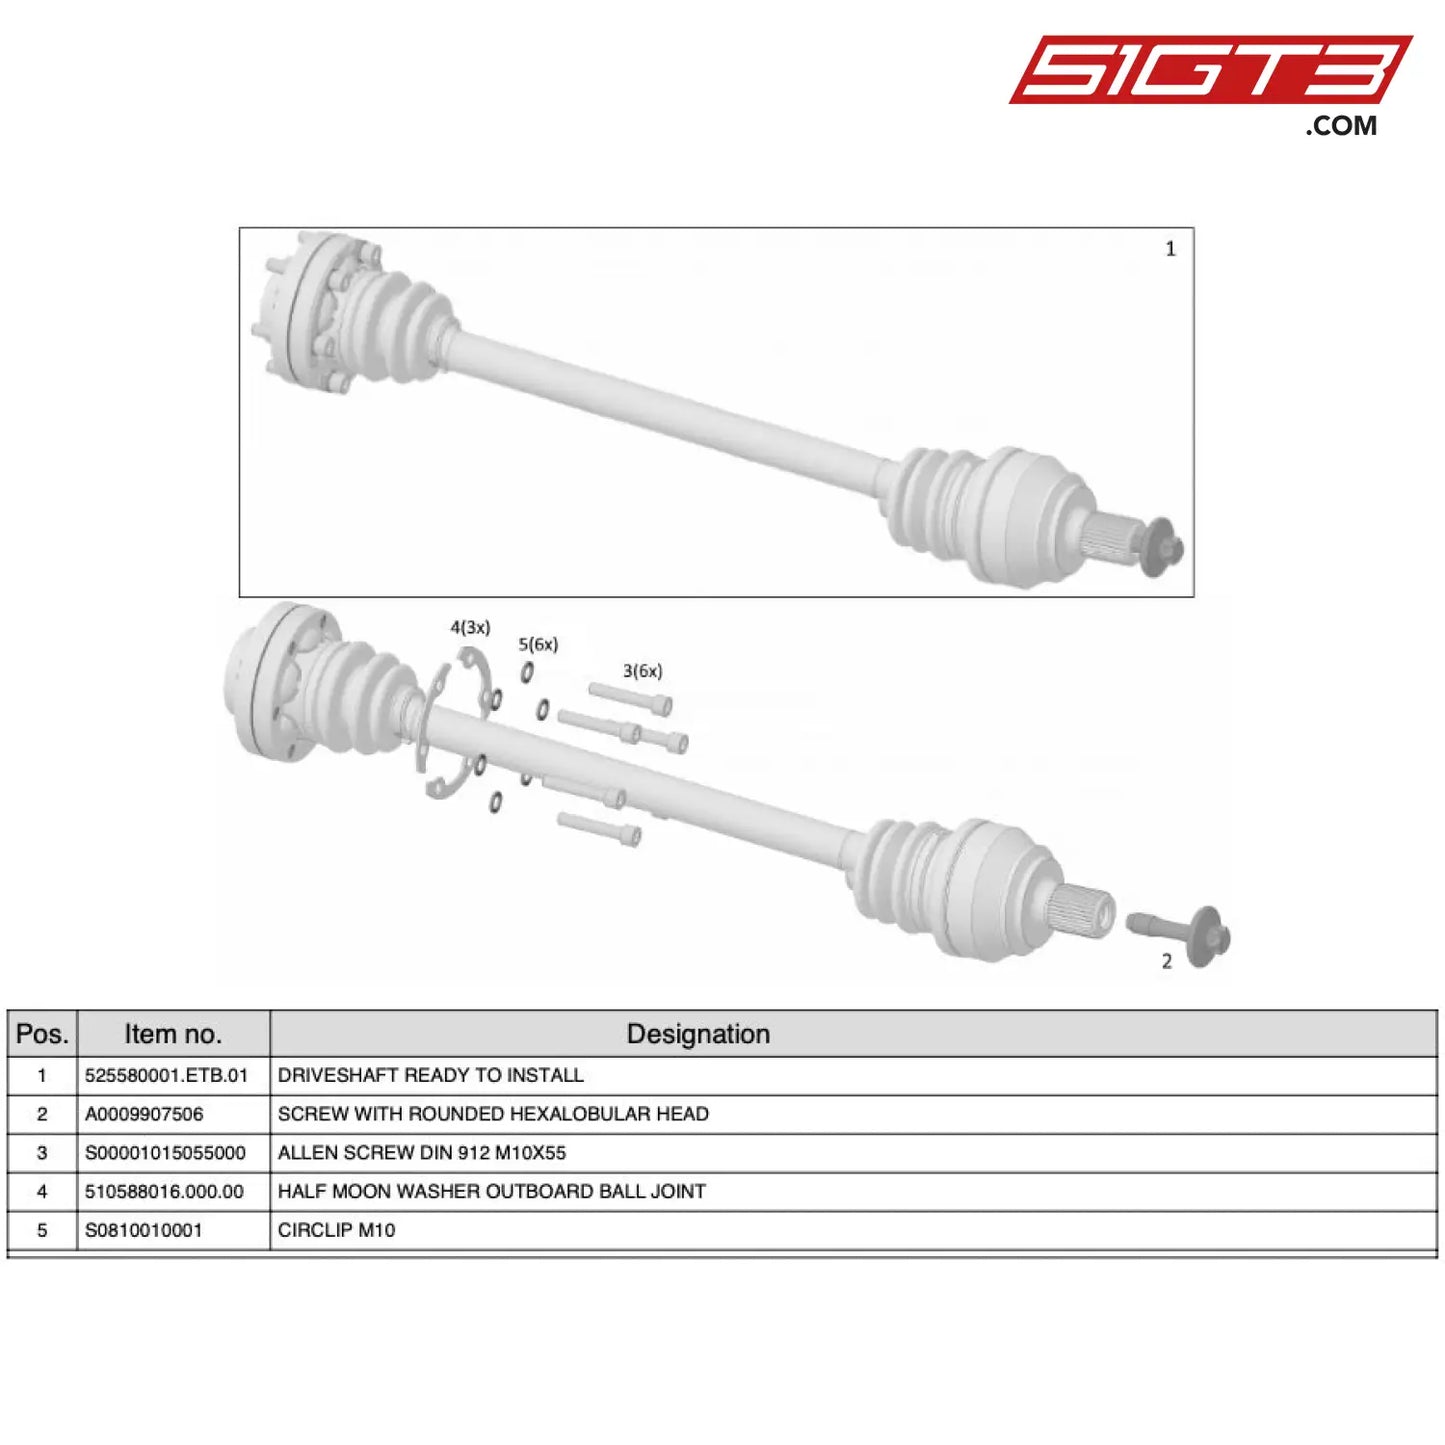 Screw With Rounded Hexalobular Head - A0009907506 [Mercedes-Amg Gt4] Drive Shafts